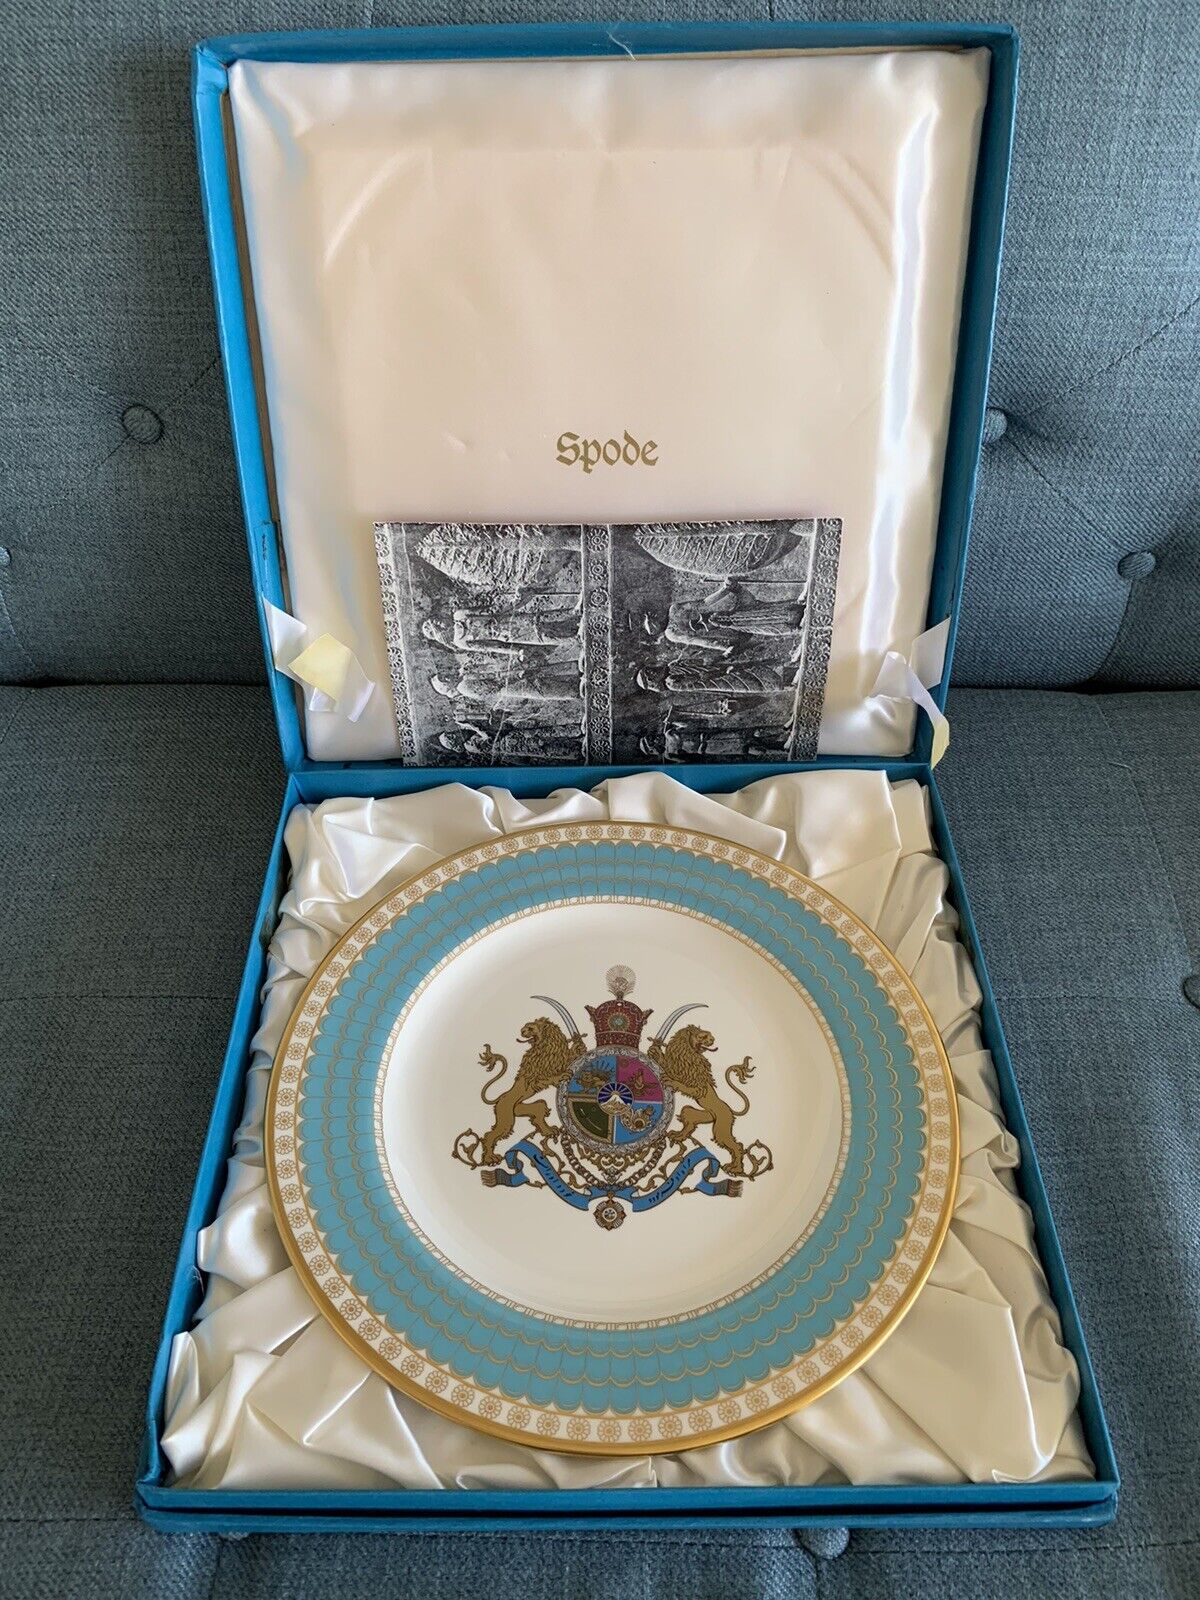 LE SPODE “THE IMPERIAL PLATE OF PERSIA” Plate  1971 limited number